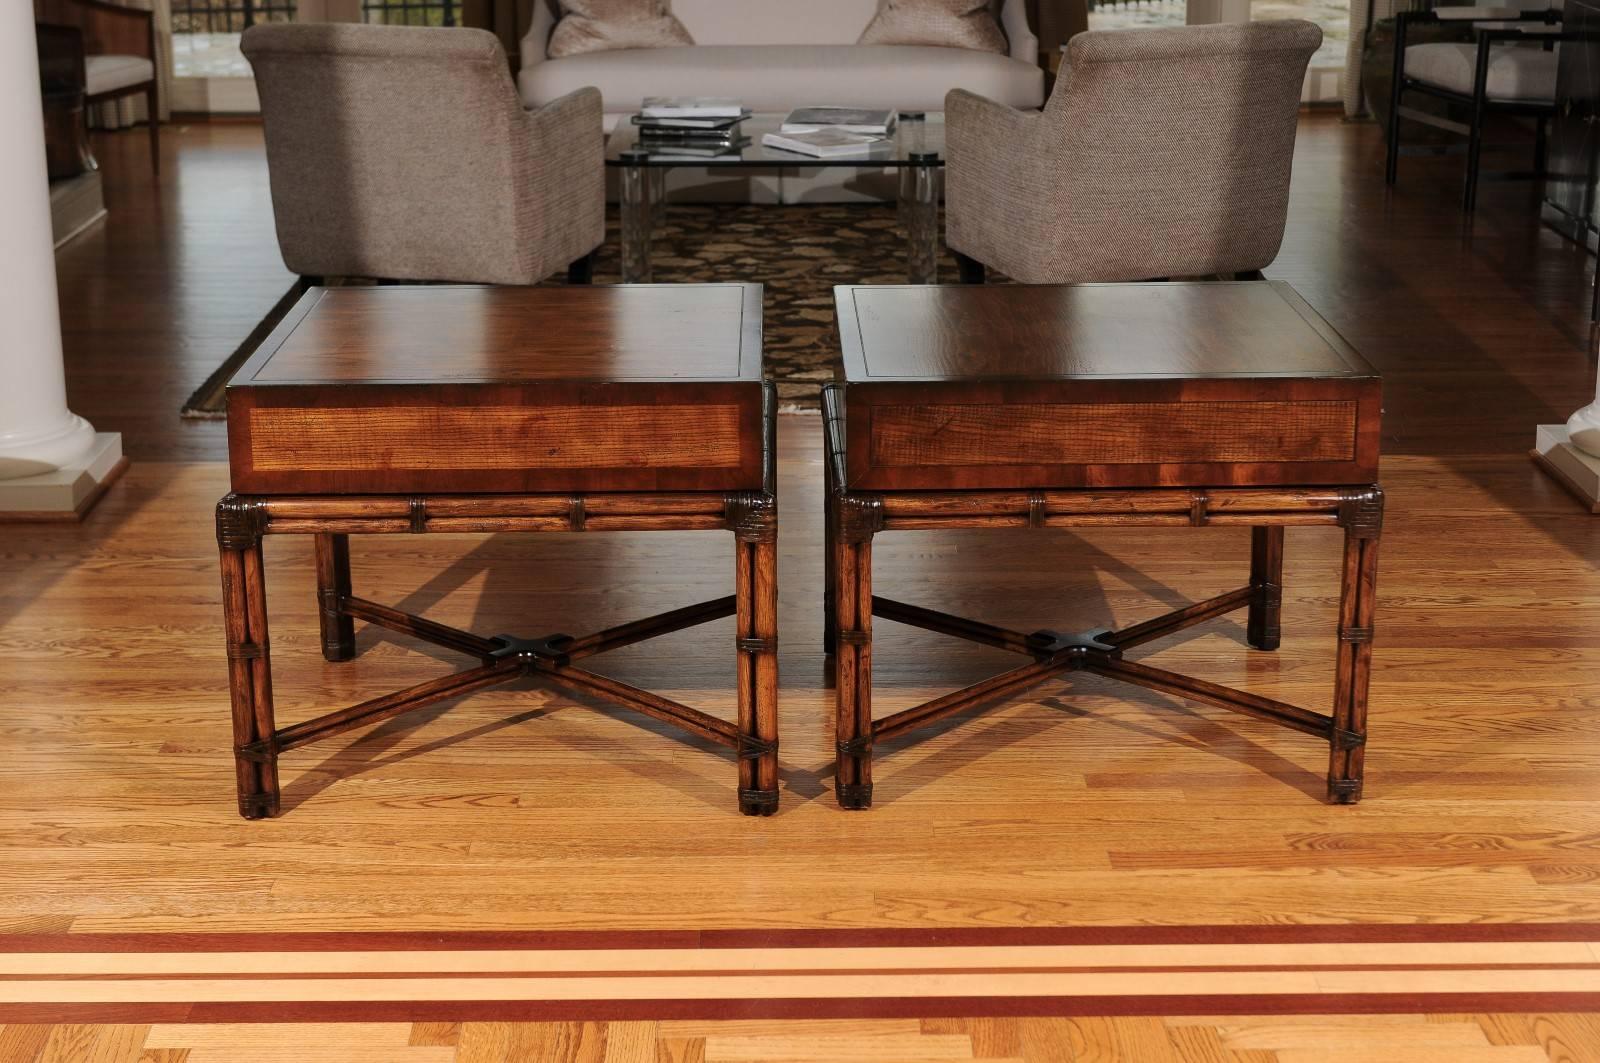 Beautiful Restored Pair of Large-Scale Vintage Campaign End Tables by Henredon In Excellent Condition For Sale In Atlanta, GA